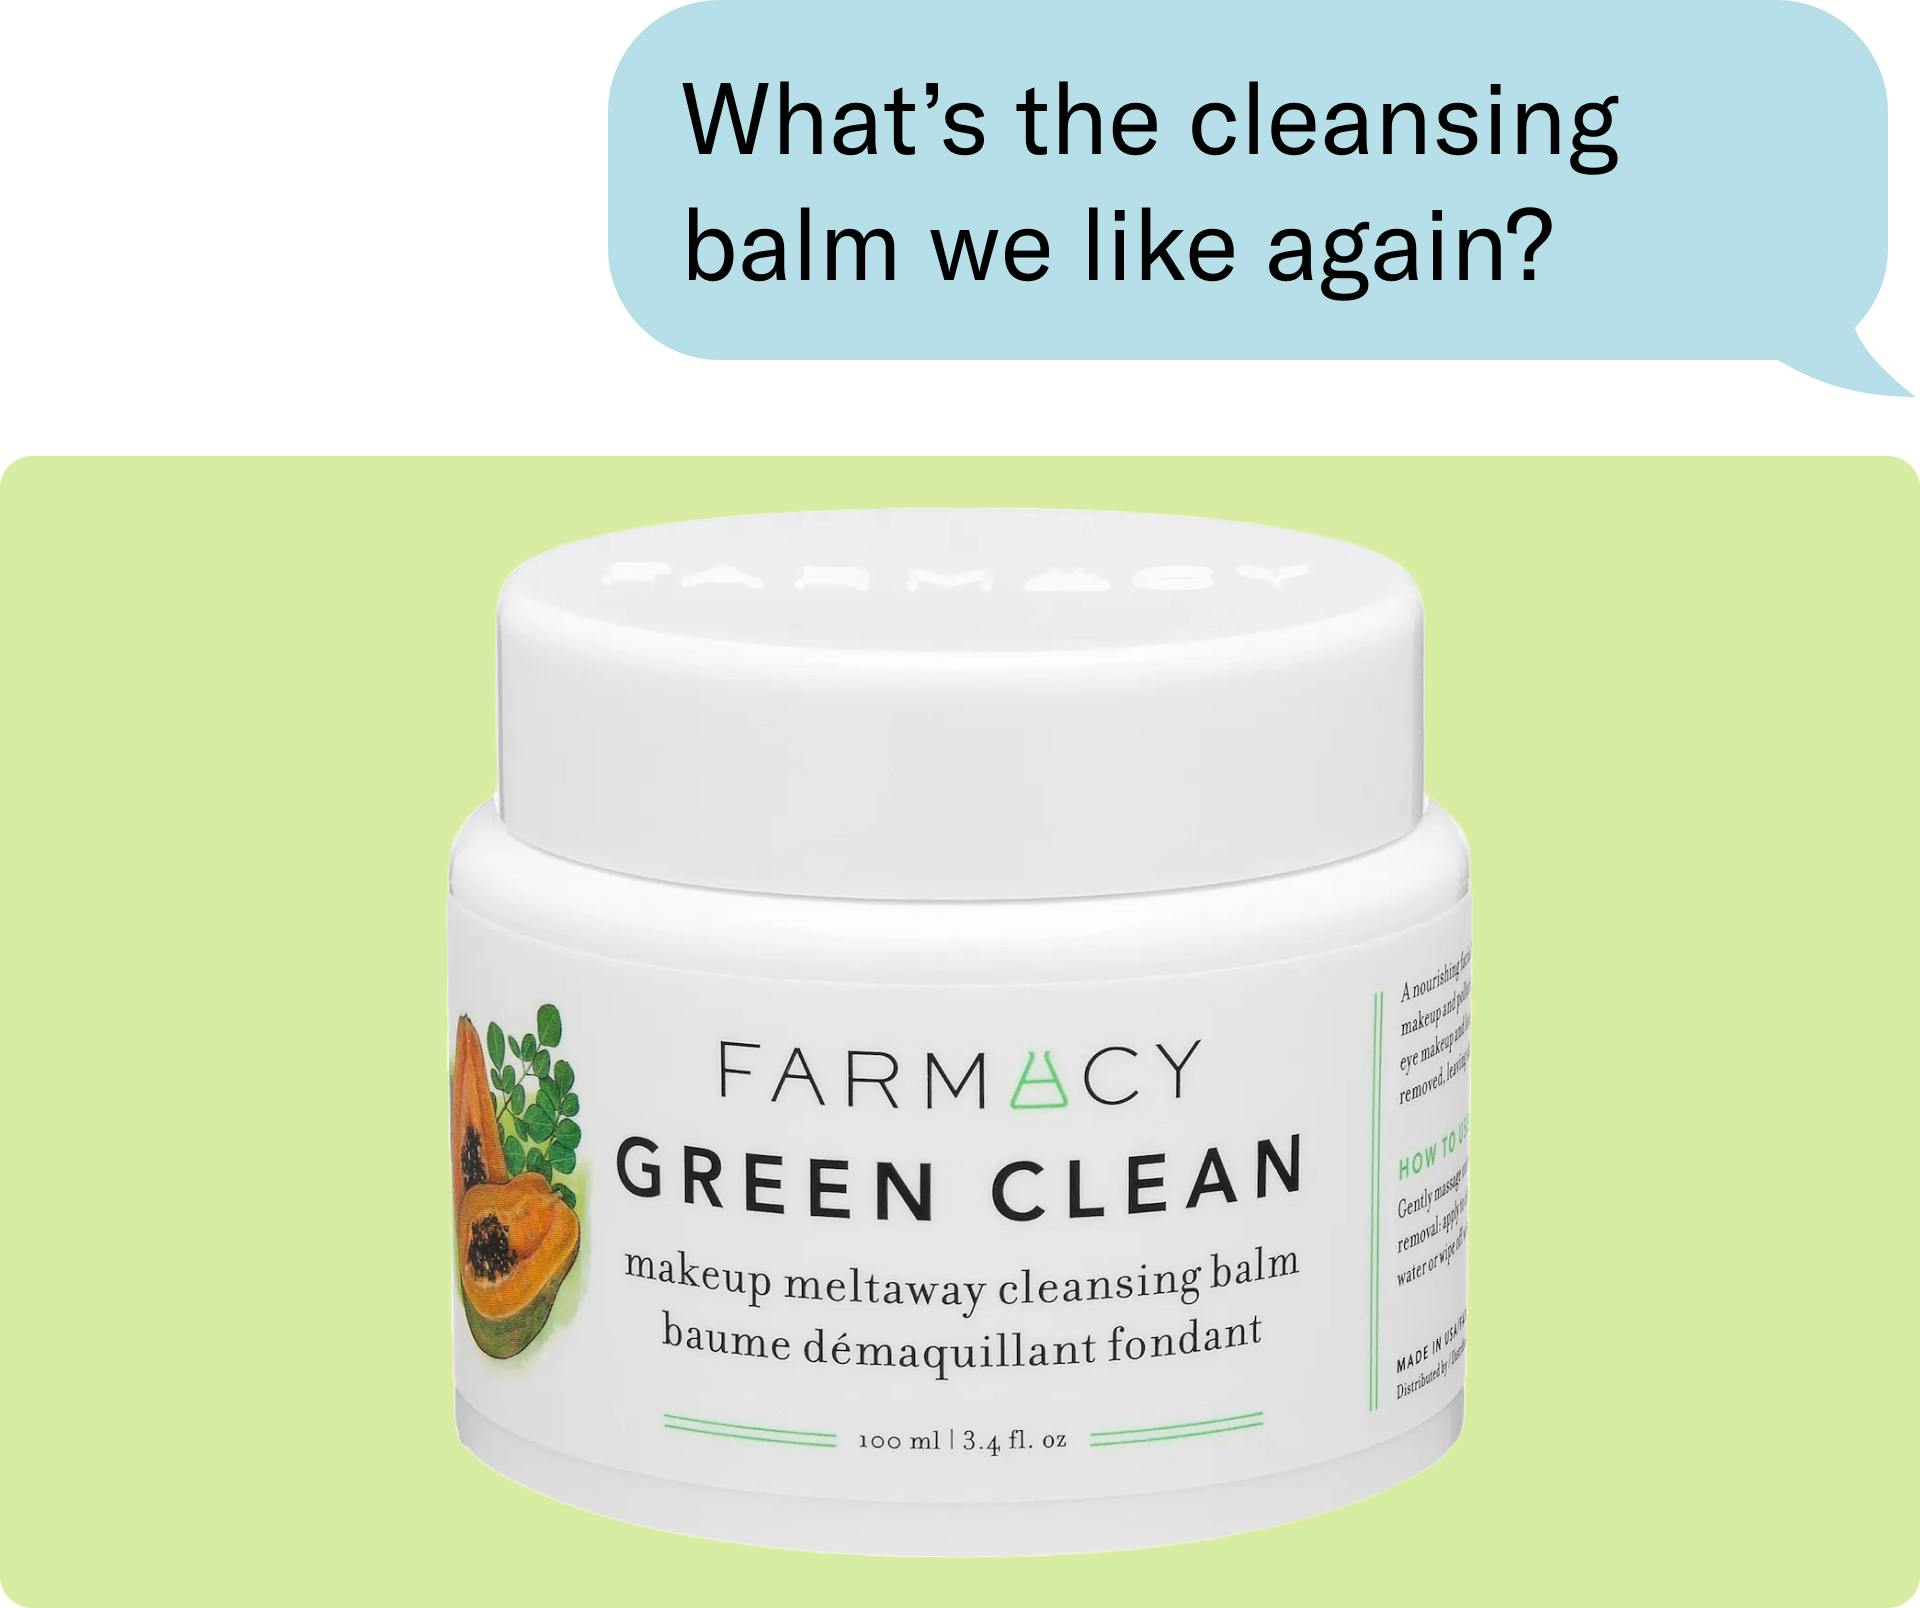 What's the cleansing balm we like again?